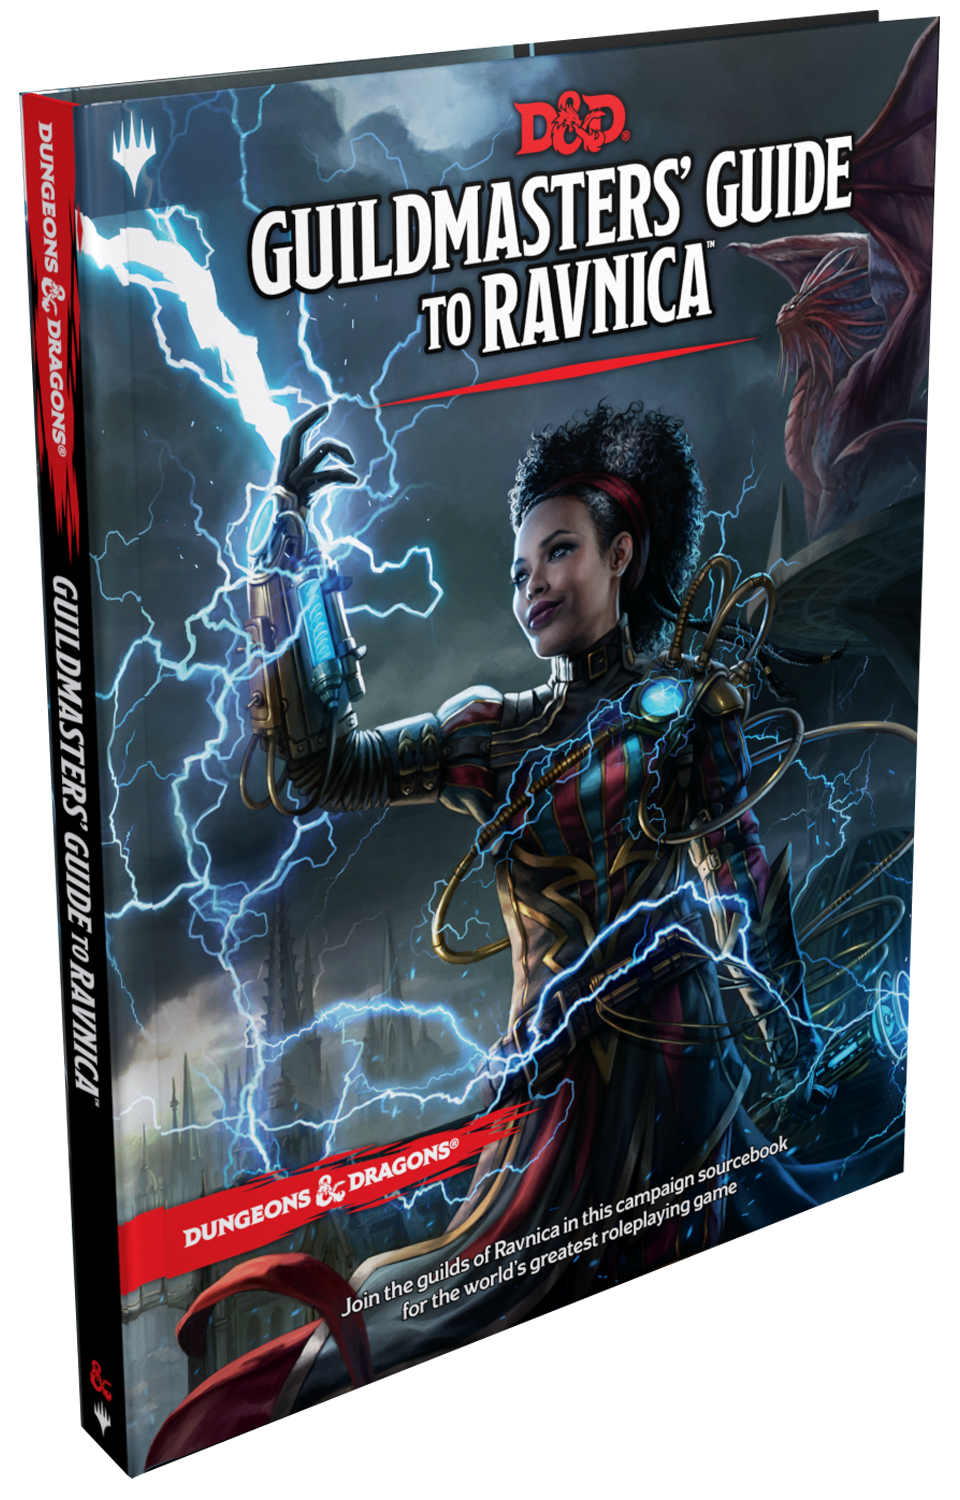 Dungeons & Dragons 5th edition - Guildmasters' Guide to Ravnica